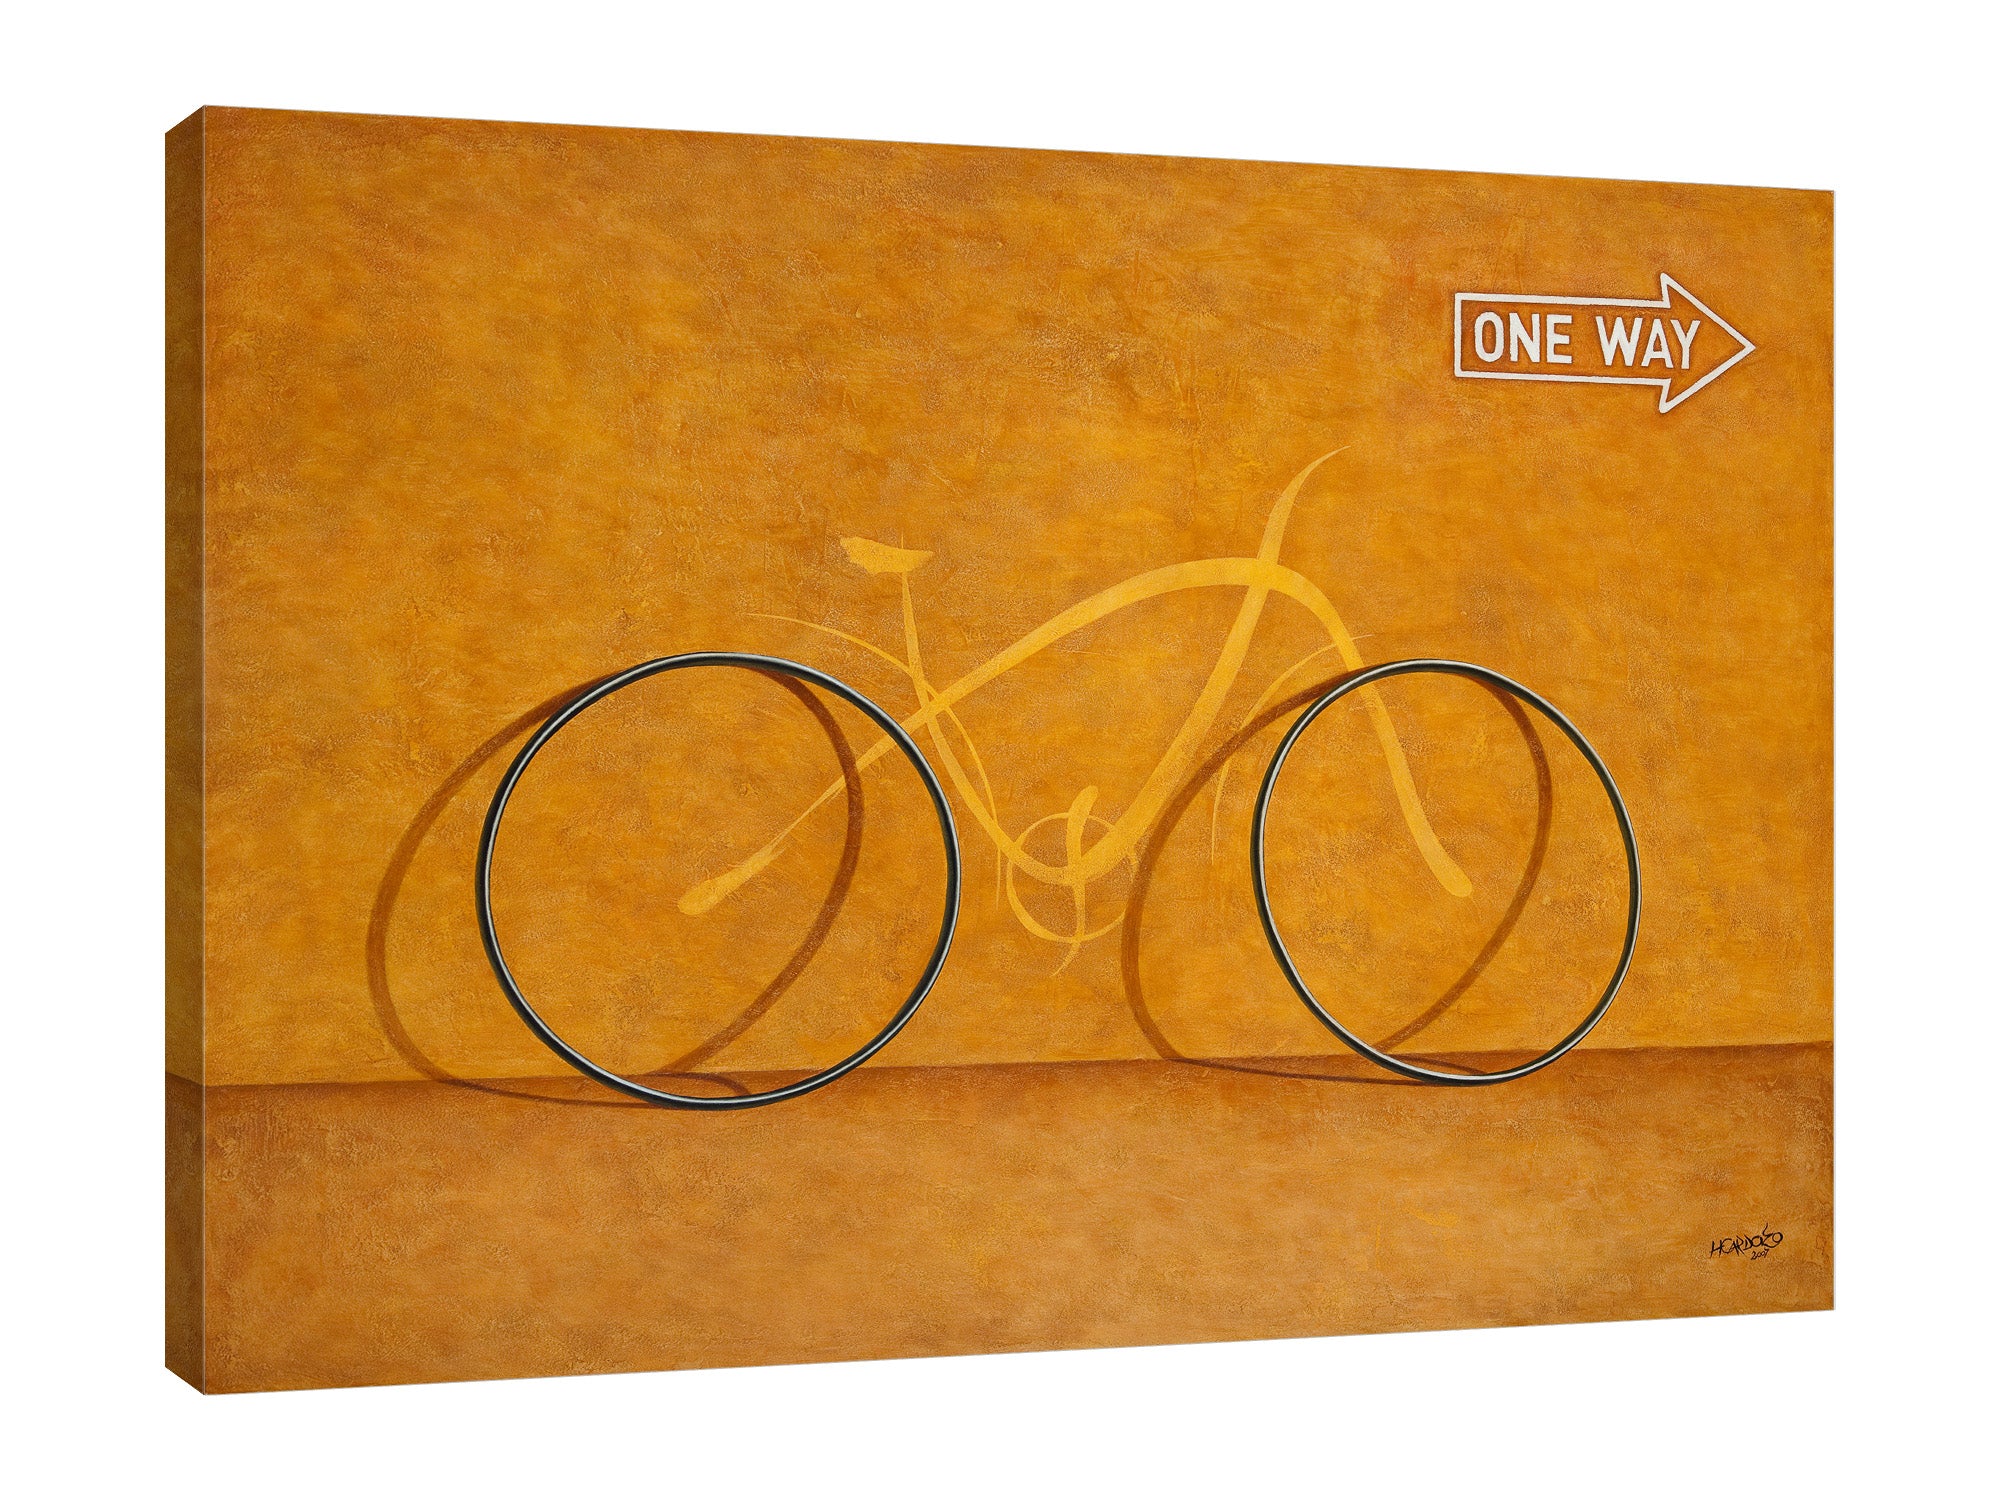 Horacio-Cardozo,Modern & Contemporary,Transportation,transportation,transportations,bike,bikes,bicycle,bicycles,tires,tire,one way,words,word,one,way,arrow,arrows,golden,Brown,Charcoal Gray,Mist Gray,White,Gray